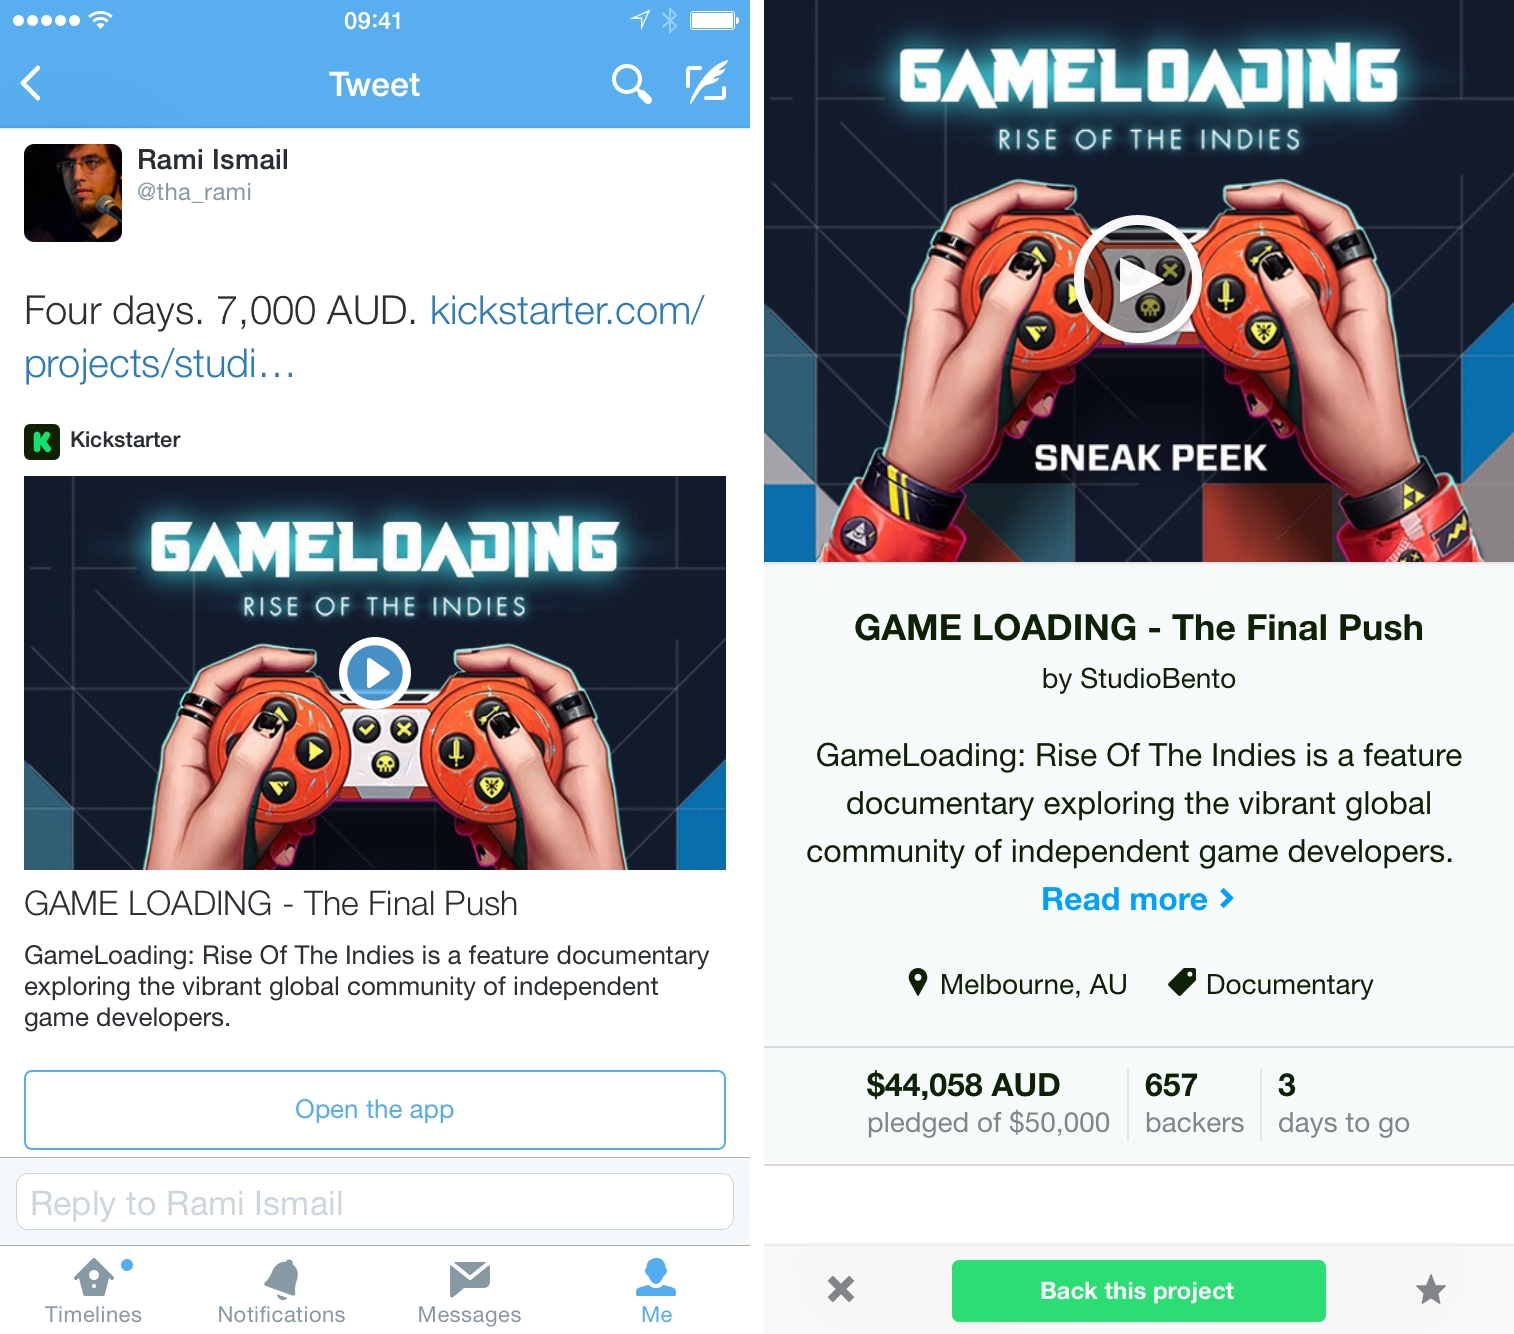 Kickstarter preview and deep-linking in Twitter.